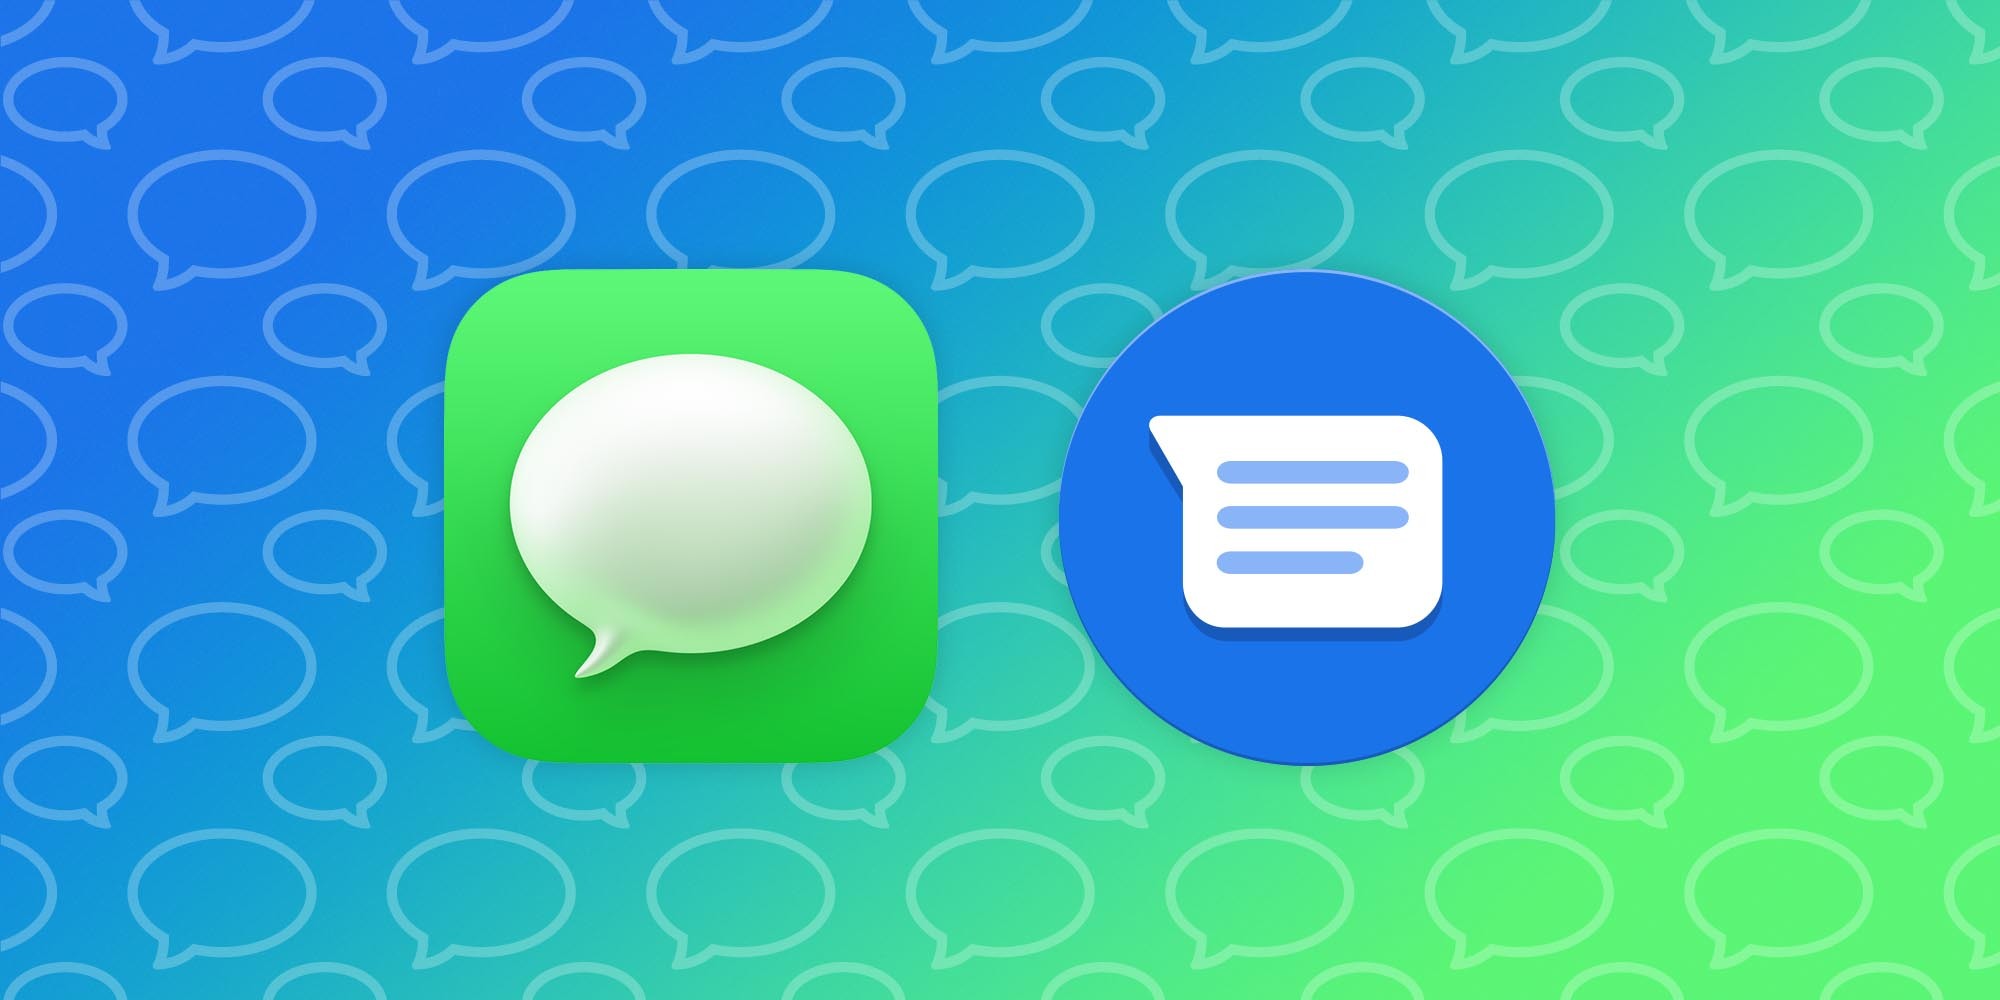 What is the difference between iMessage and SMS/MMS? - Apple Support